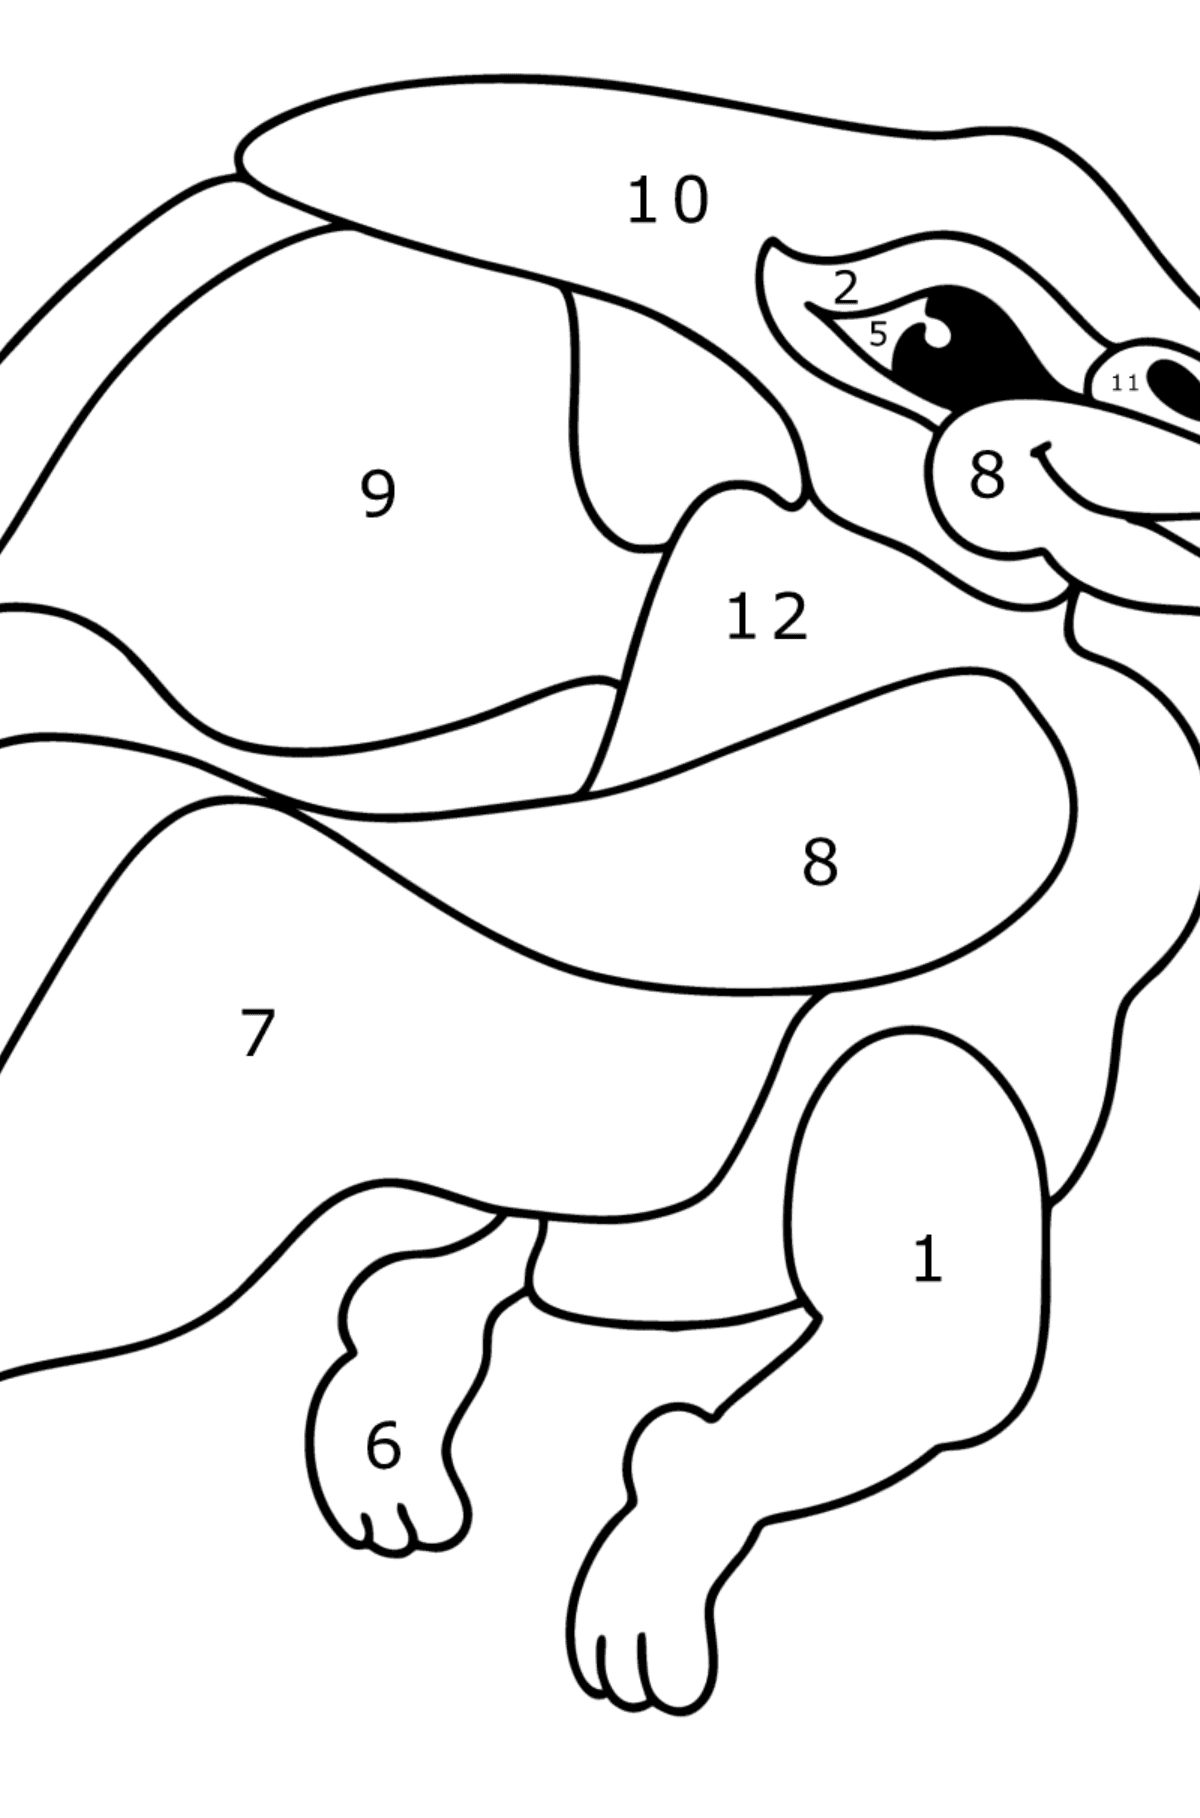 Pteranodon coloring page - Coloring by Numbers for Kids